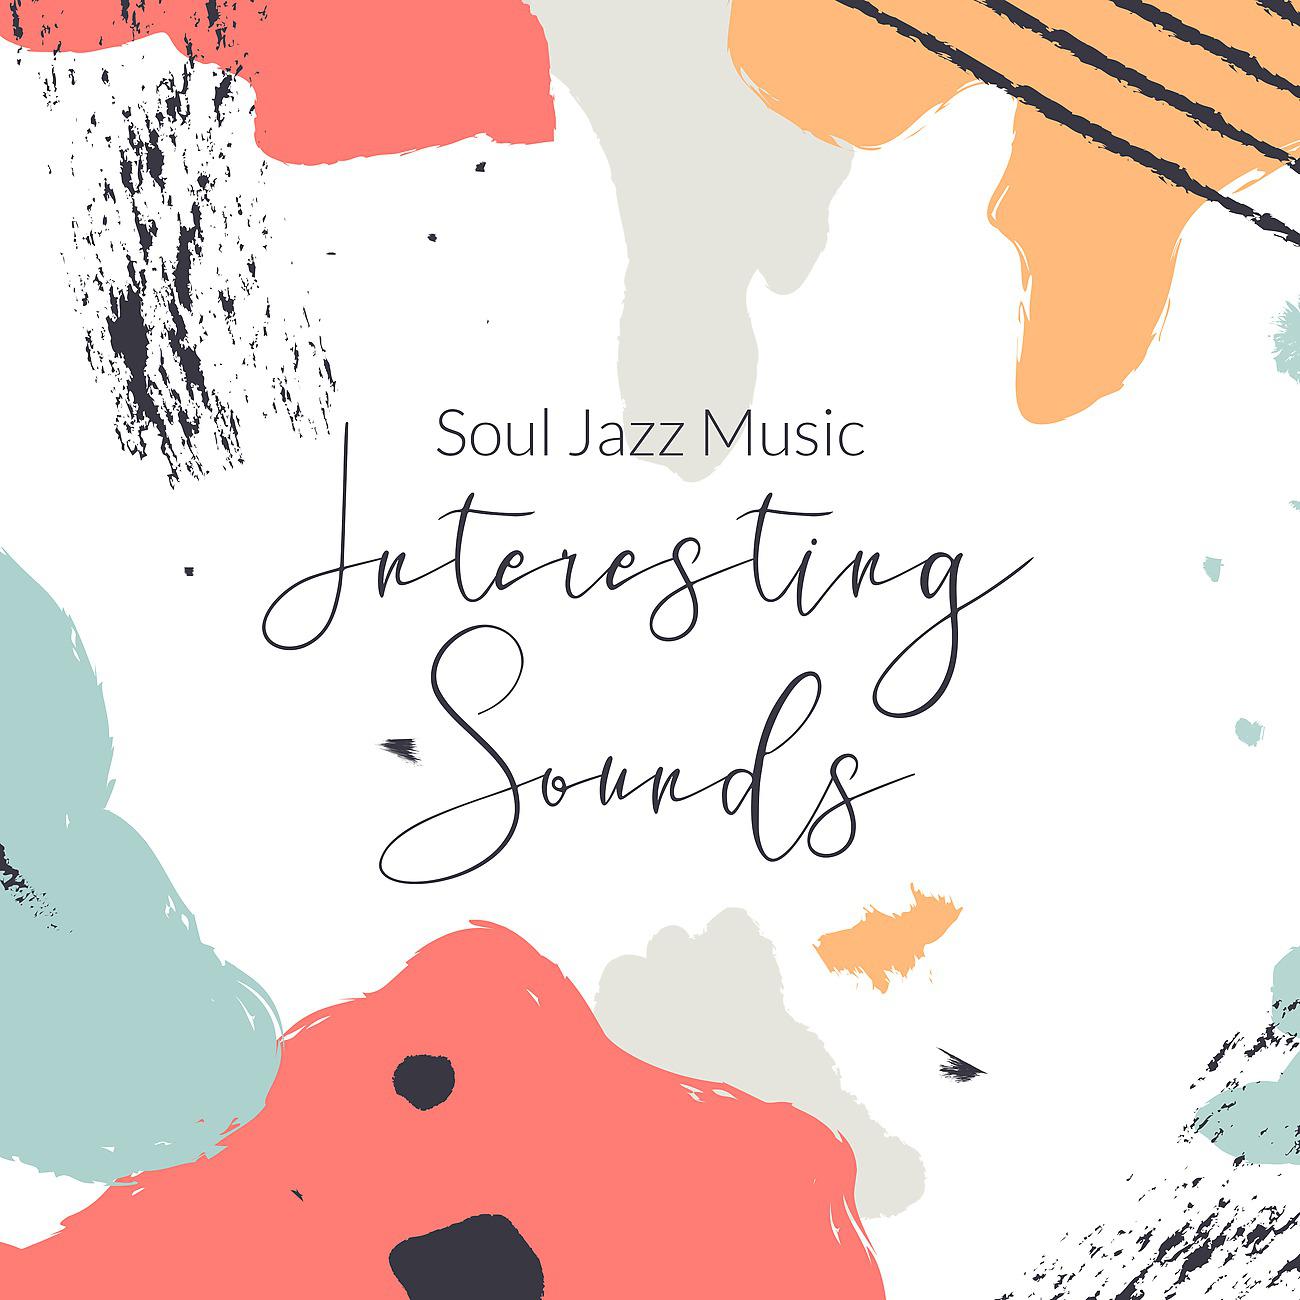 Постер альбома Soul Jazz Music. Interesting Sounds for a Pleasant Evening. Subgenre of Jazz